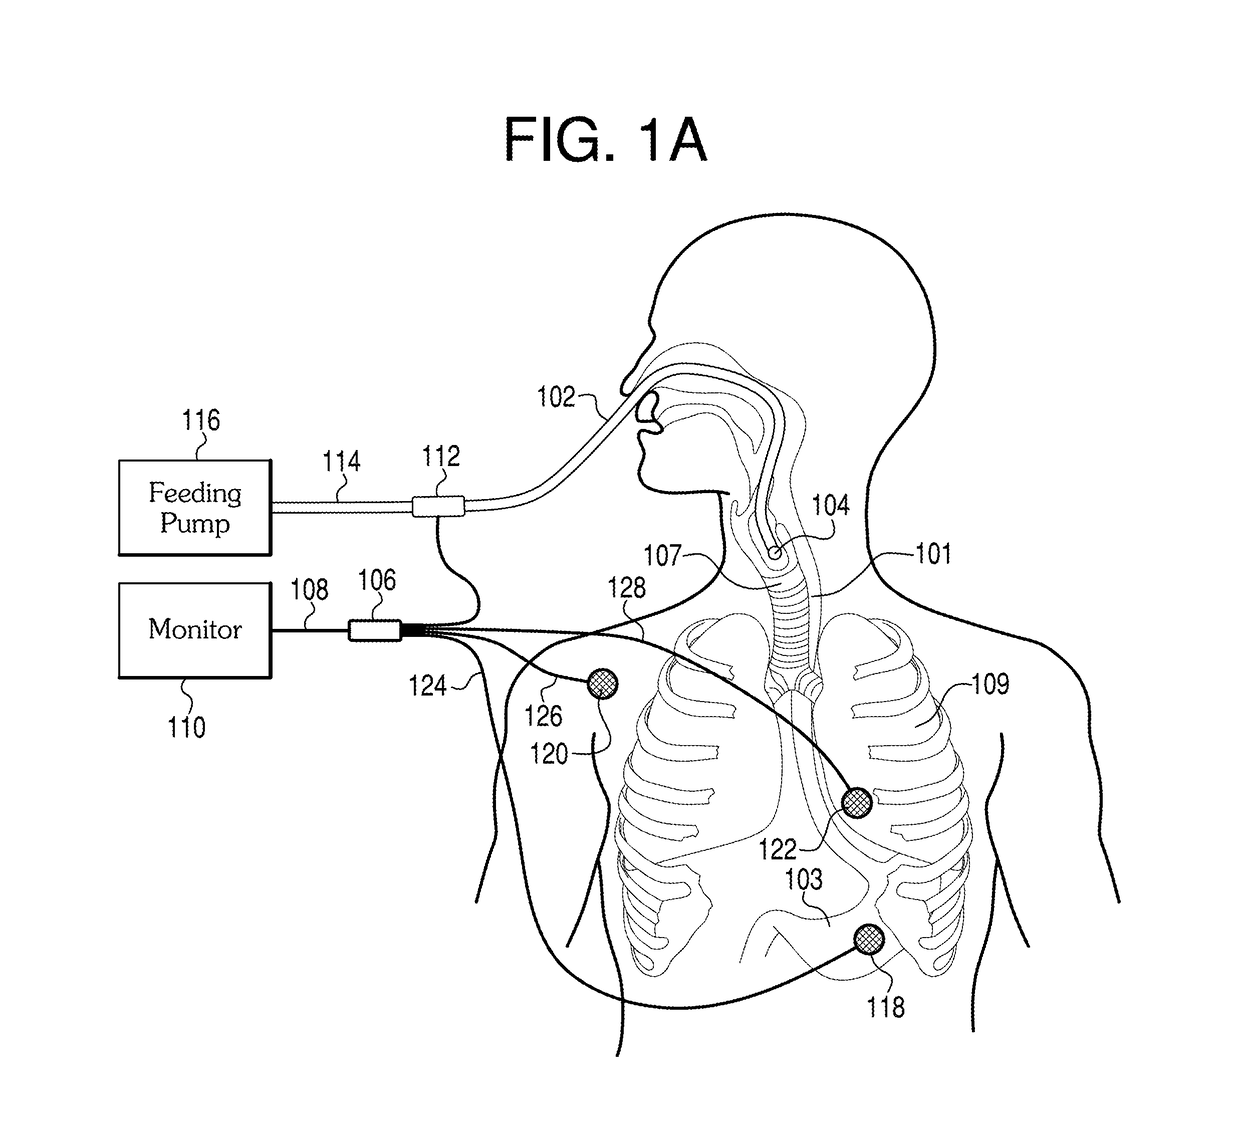 Methods and apparatus for guiding medical care based on sensor data from the gastrointestinal tract